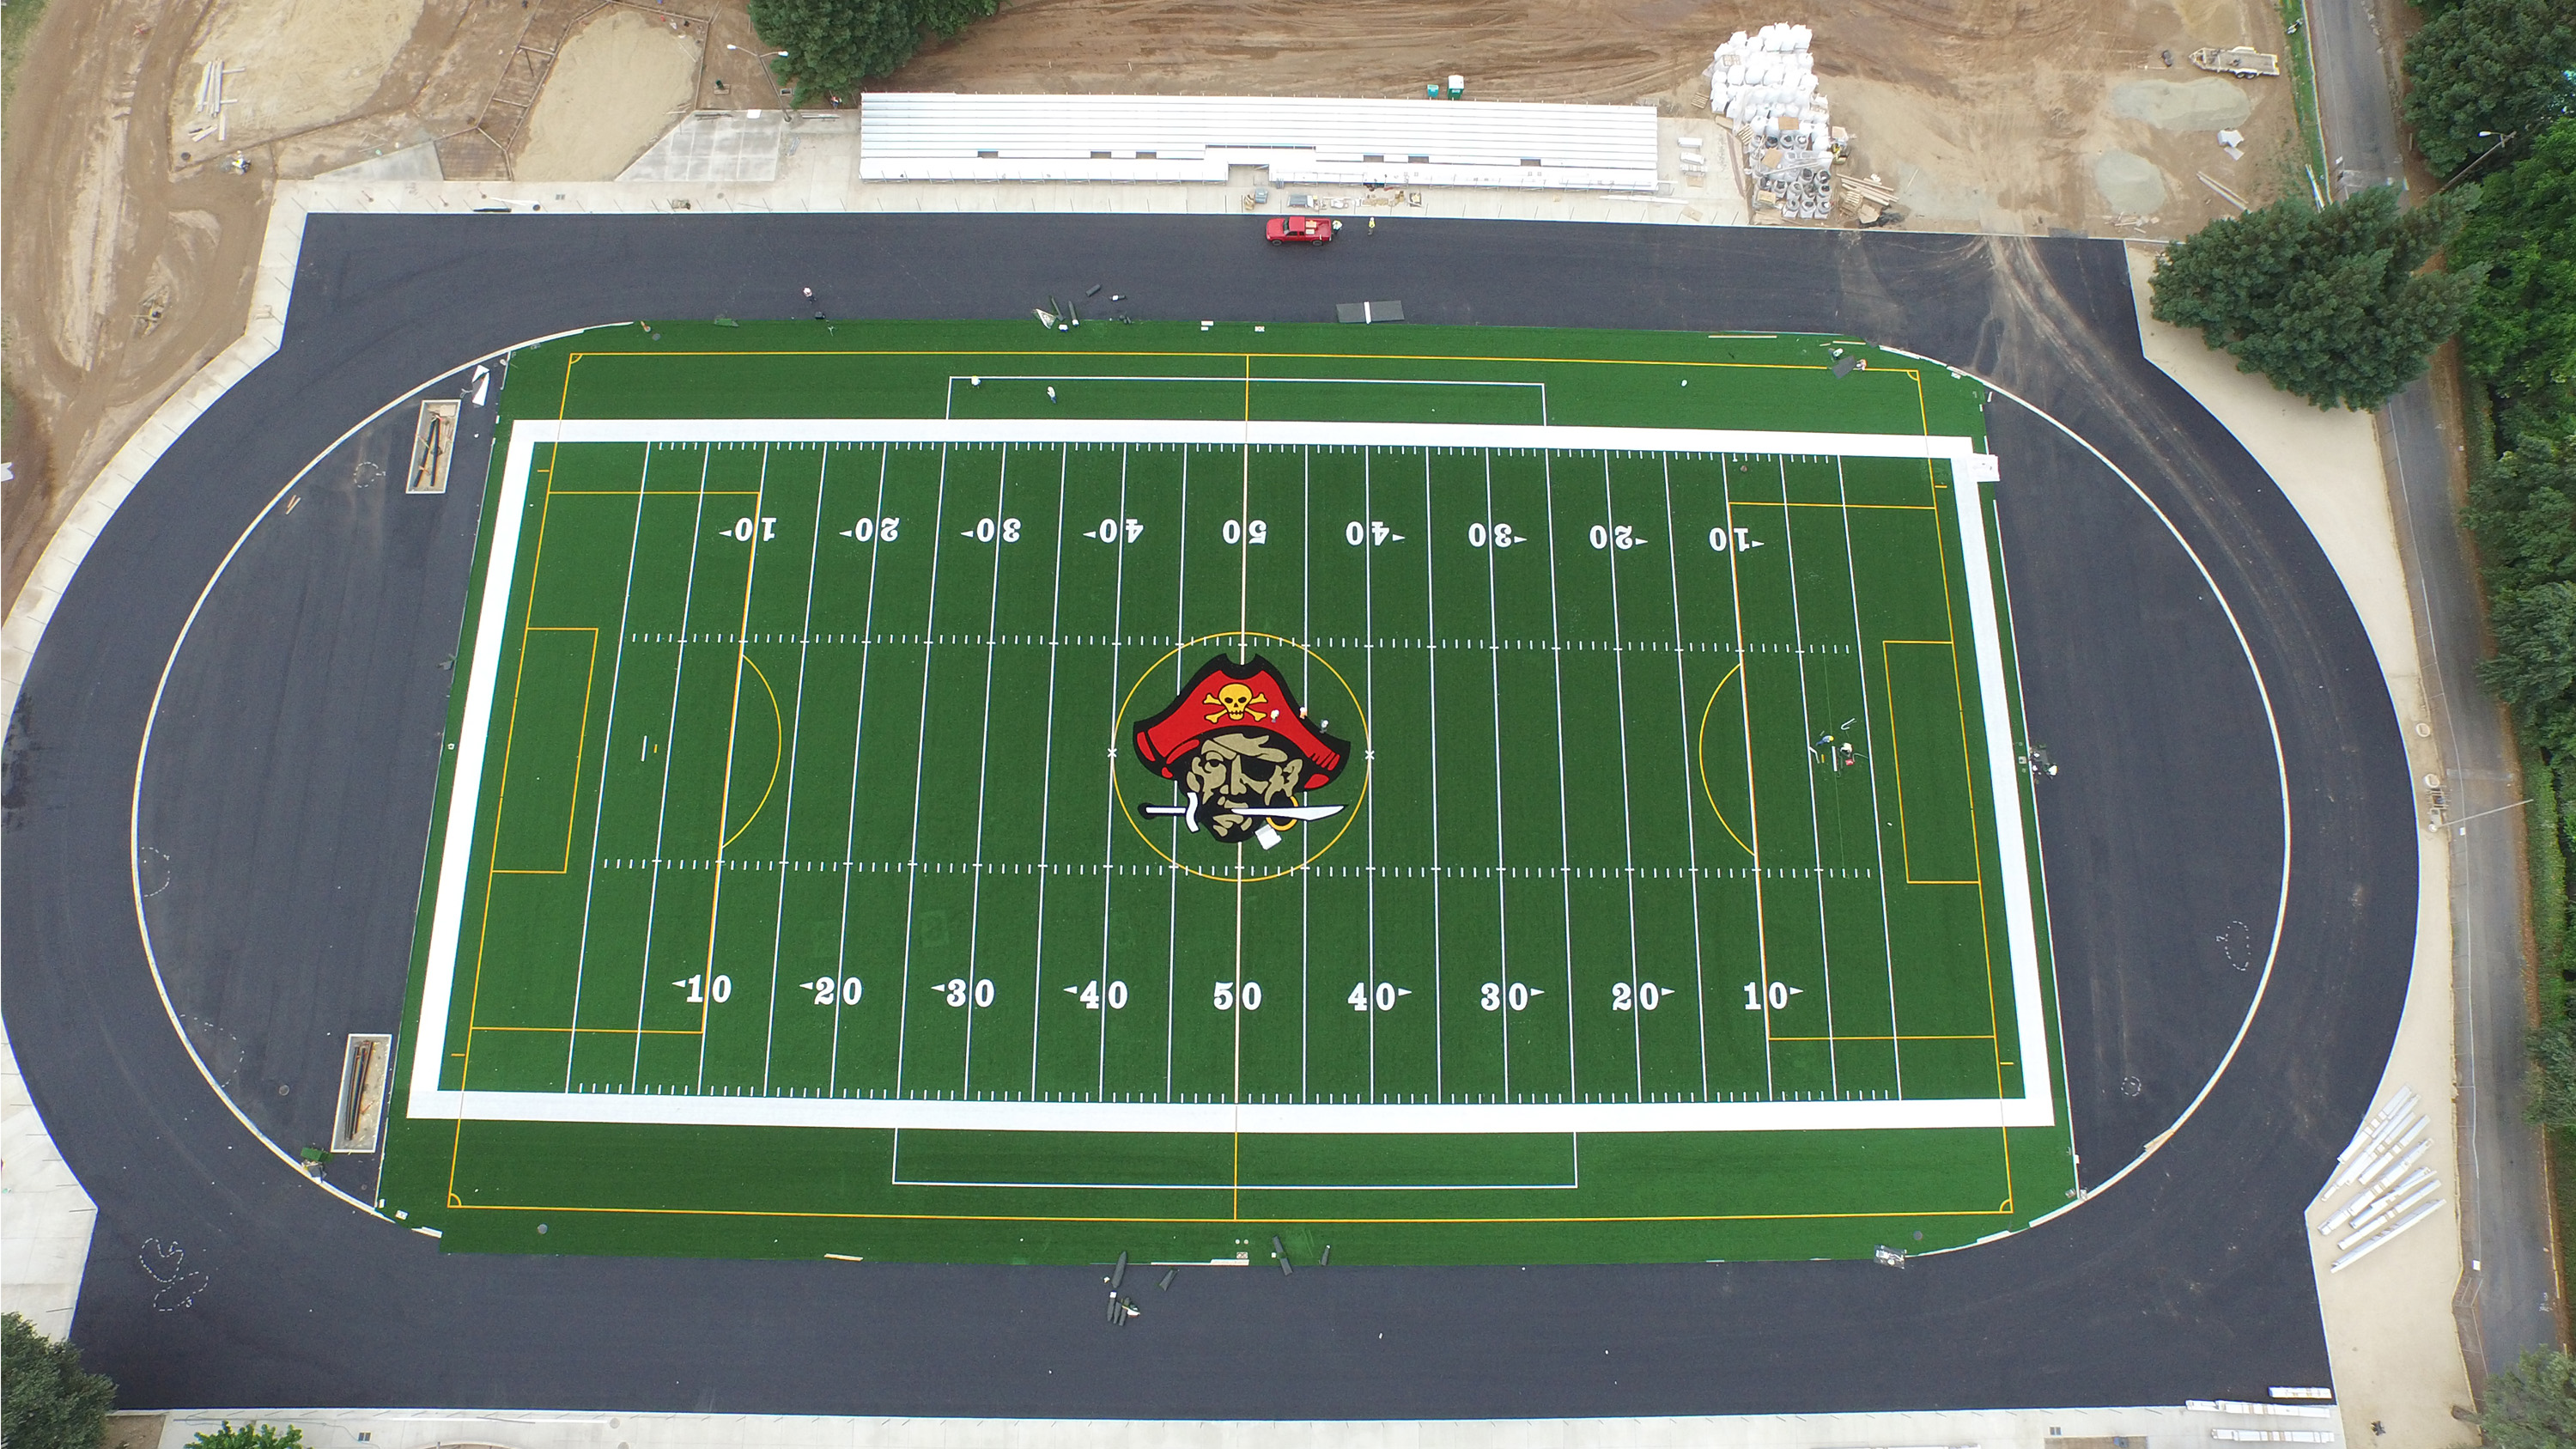 Completed AstroTurf Field at Jesuit High School